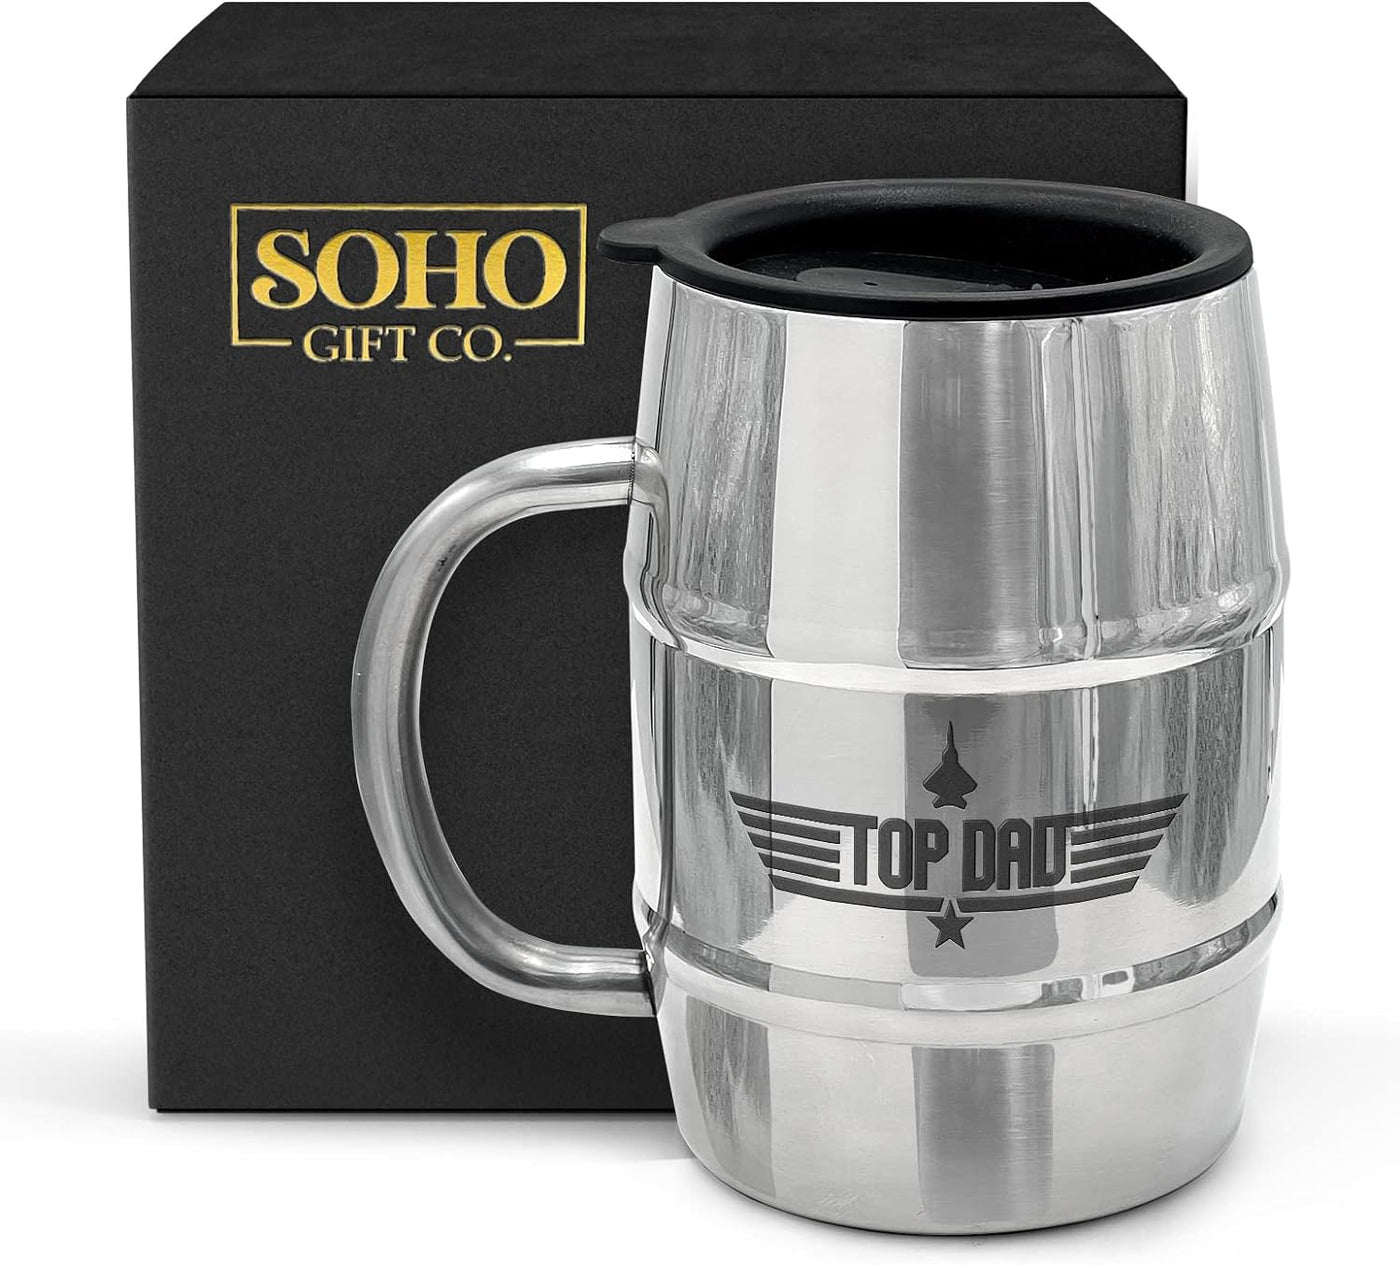 Gift Mug for Dad, Stainless Steel TOP DAD Barrel Cup with Handle and Sip Lid (Hot n' Cold) Double Wall Insulation for Beer & Coffee, 17oz (Gift Boxed for Christmas/Fathers Day)